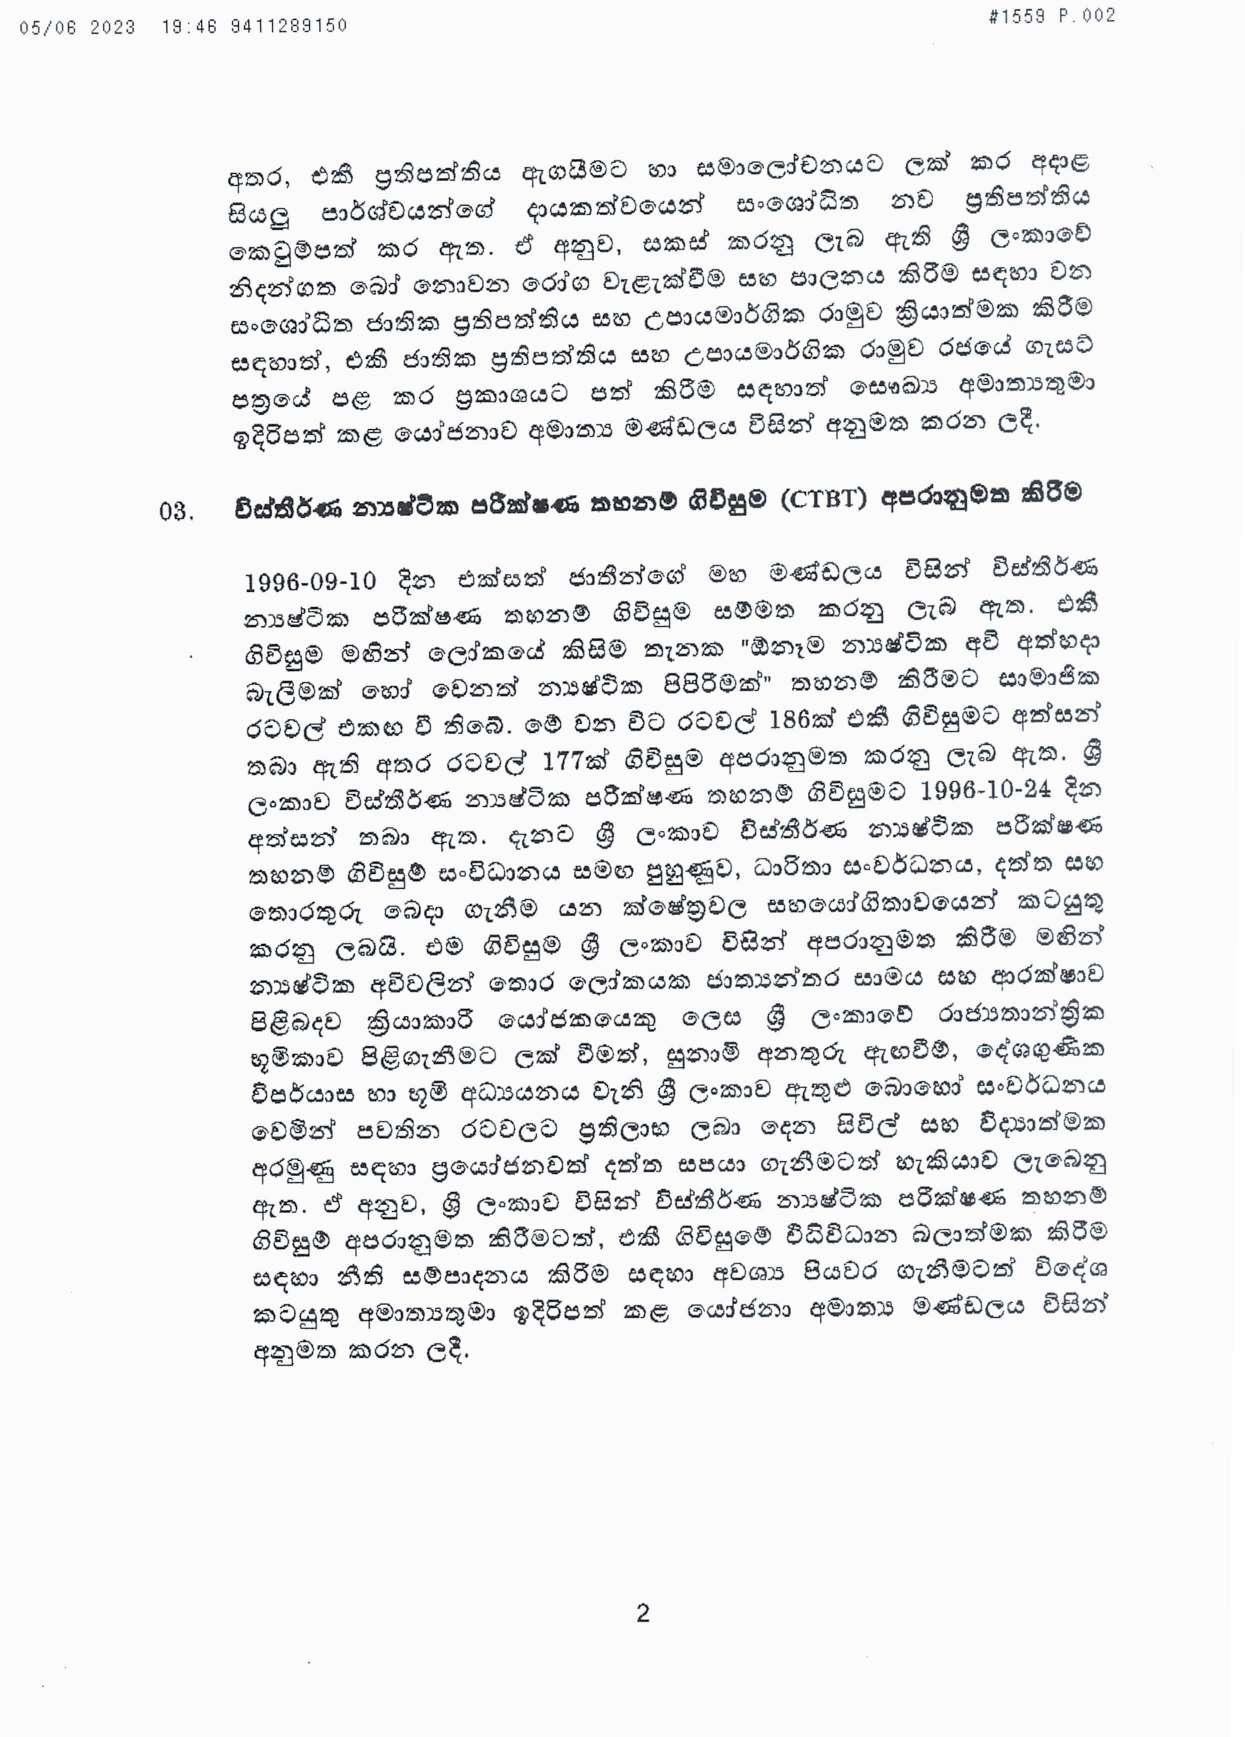 Cabinet Decisions on 05.06.2023 page 002